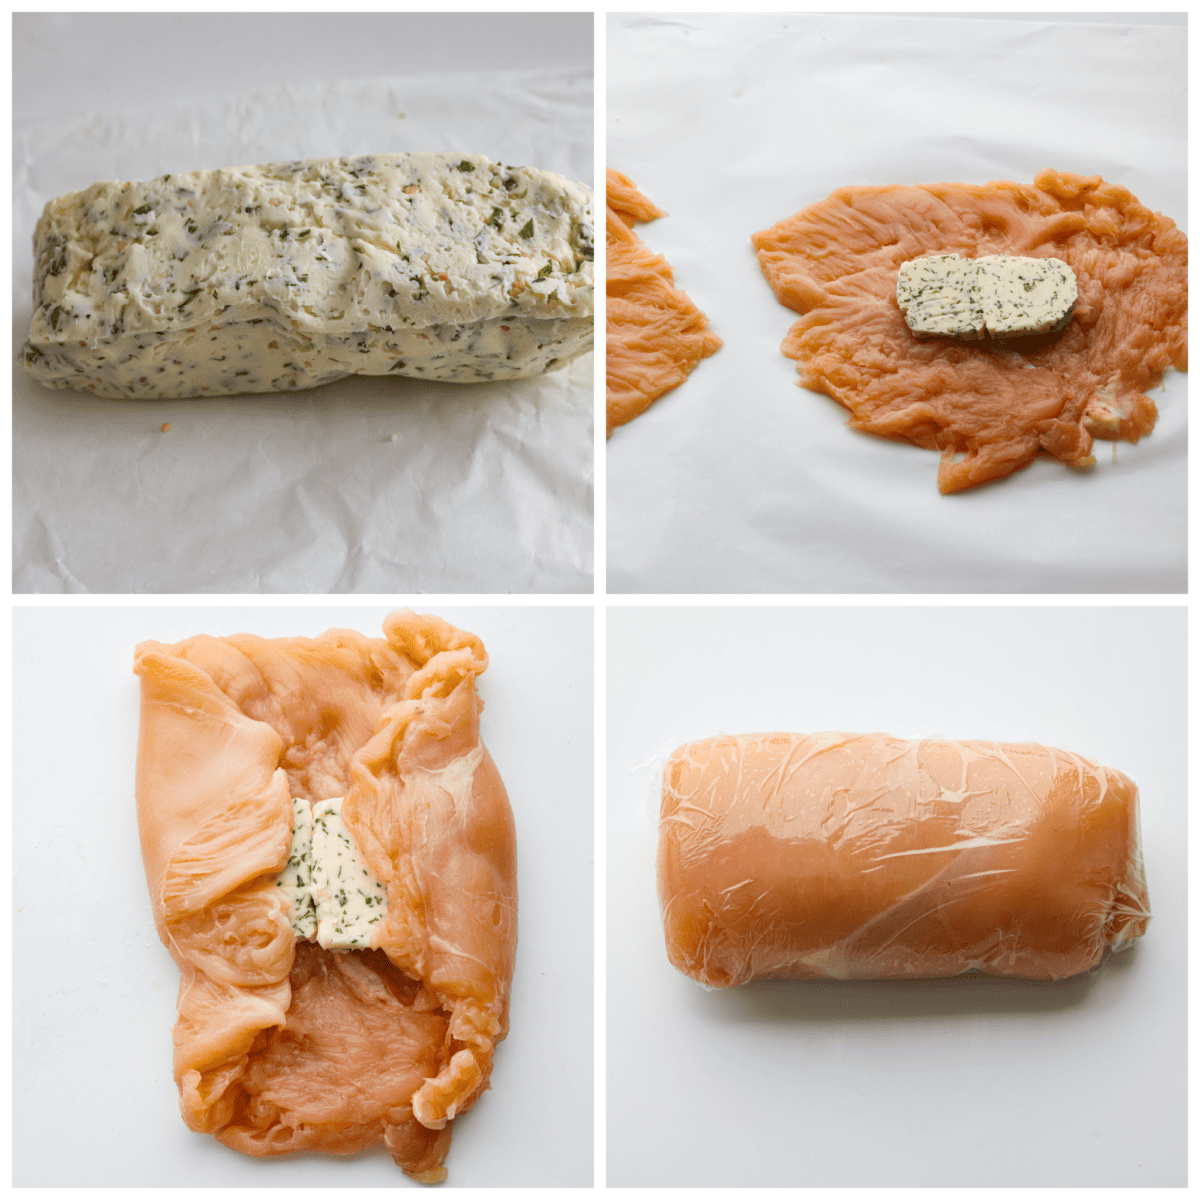 4-photo collage of chicken breasts being filled with compound butter.